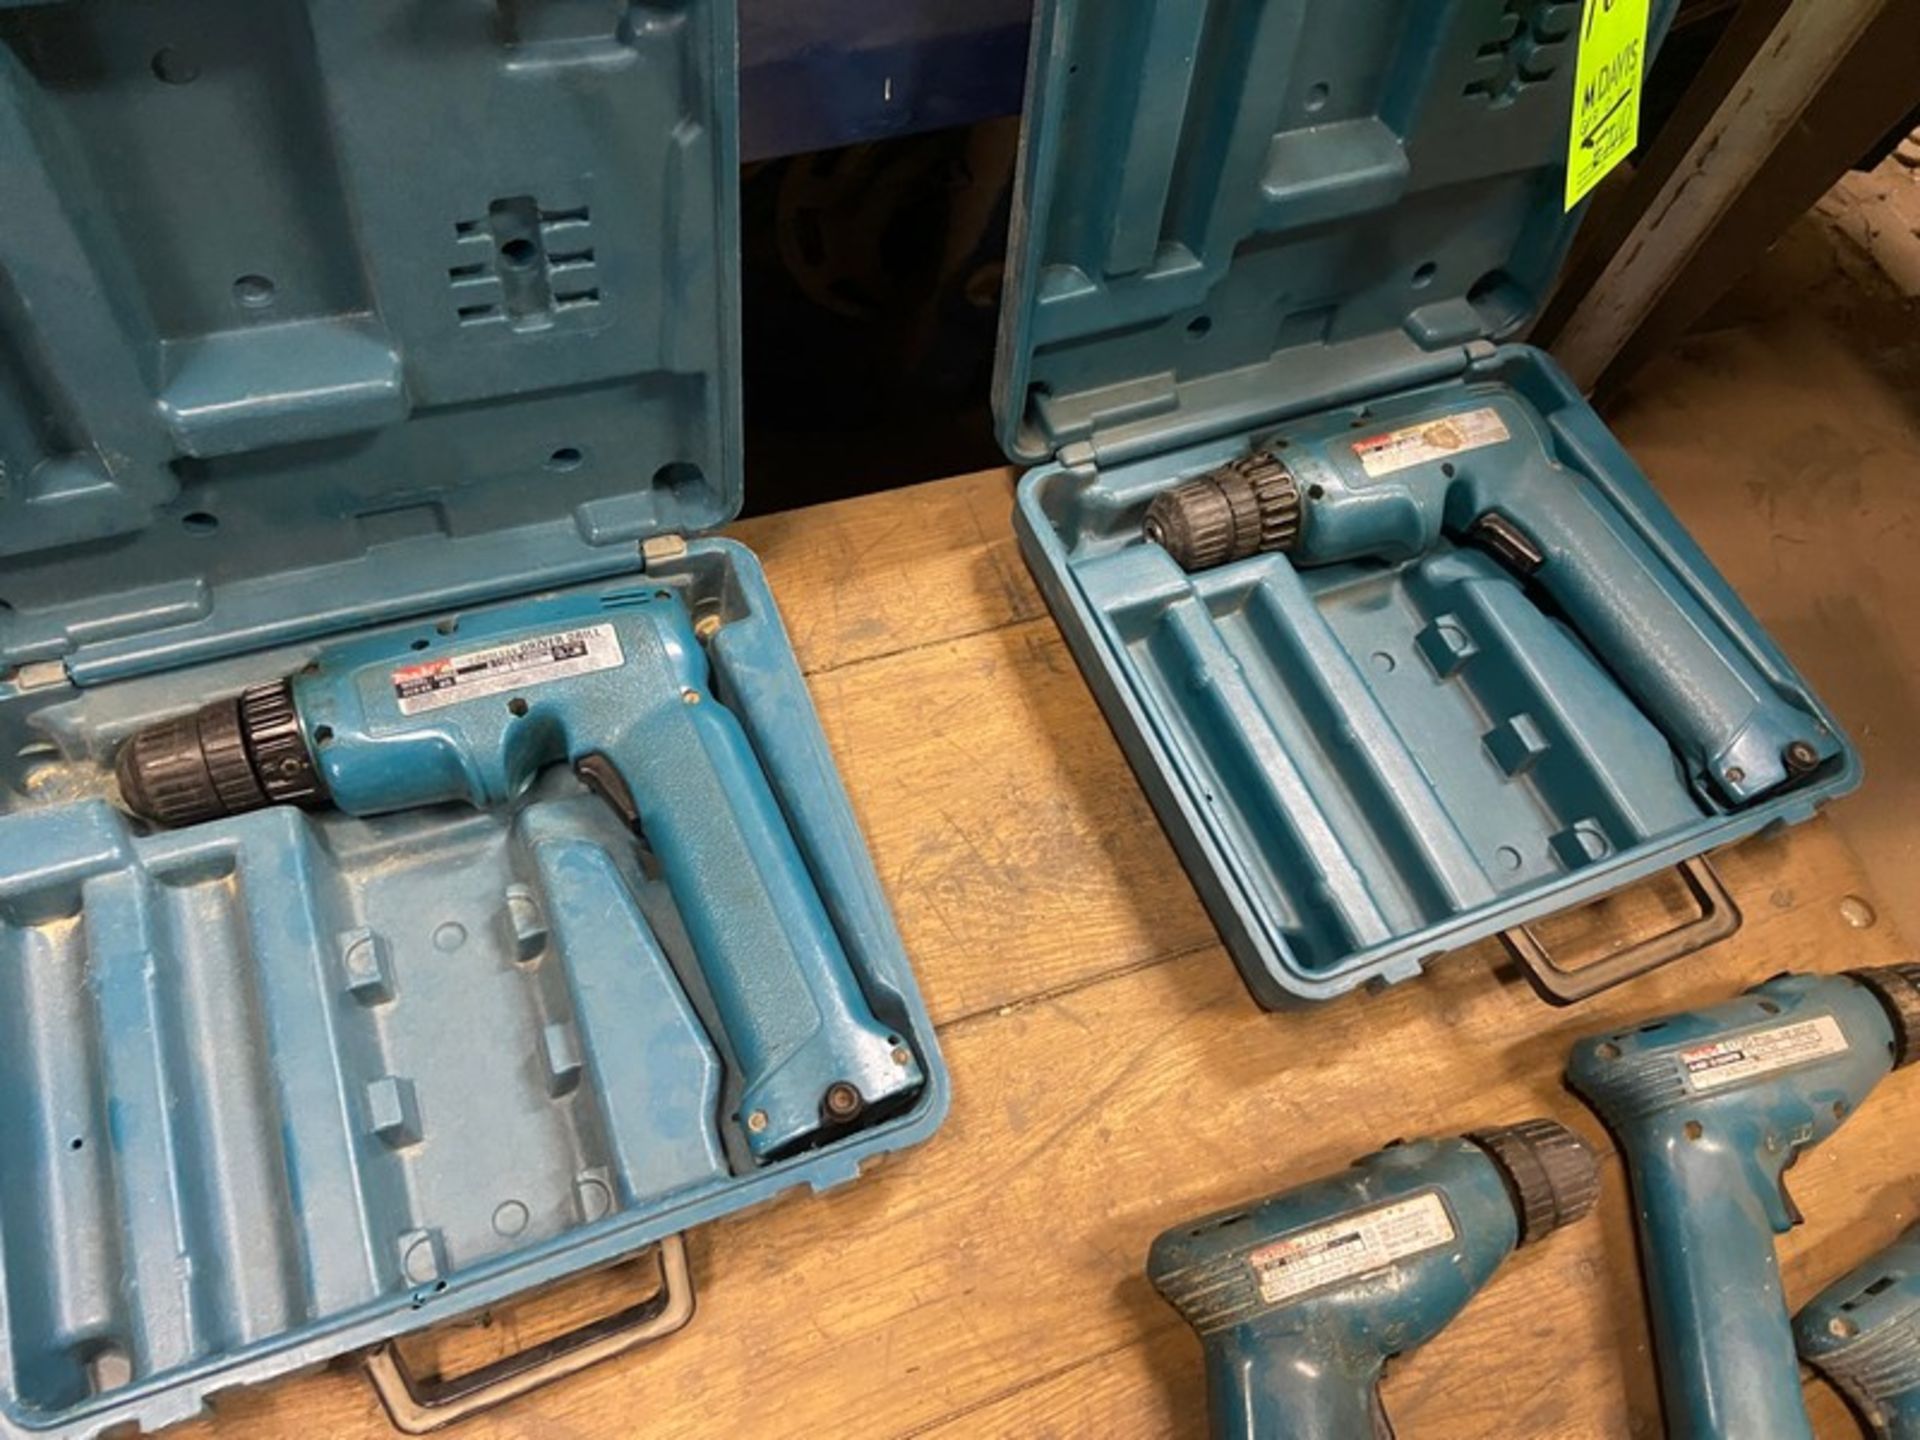 Lot of Assorted Makita Drills with Hard Cases, with Batteries & Chargers (LOCATED IN PITTSBURGH, PA) - Image 9 of 10